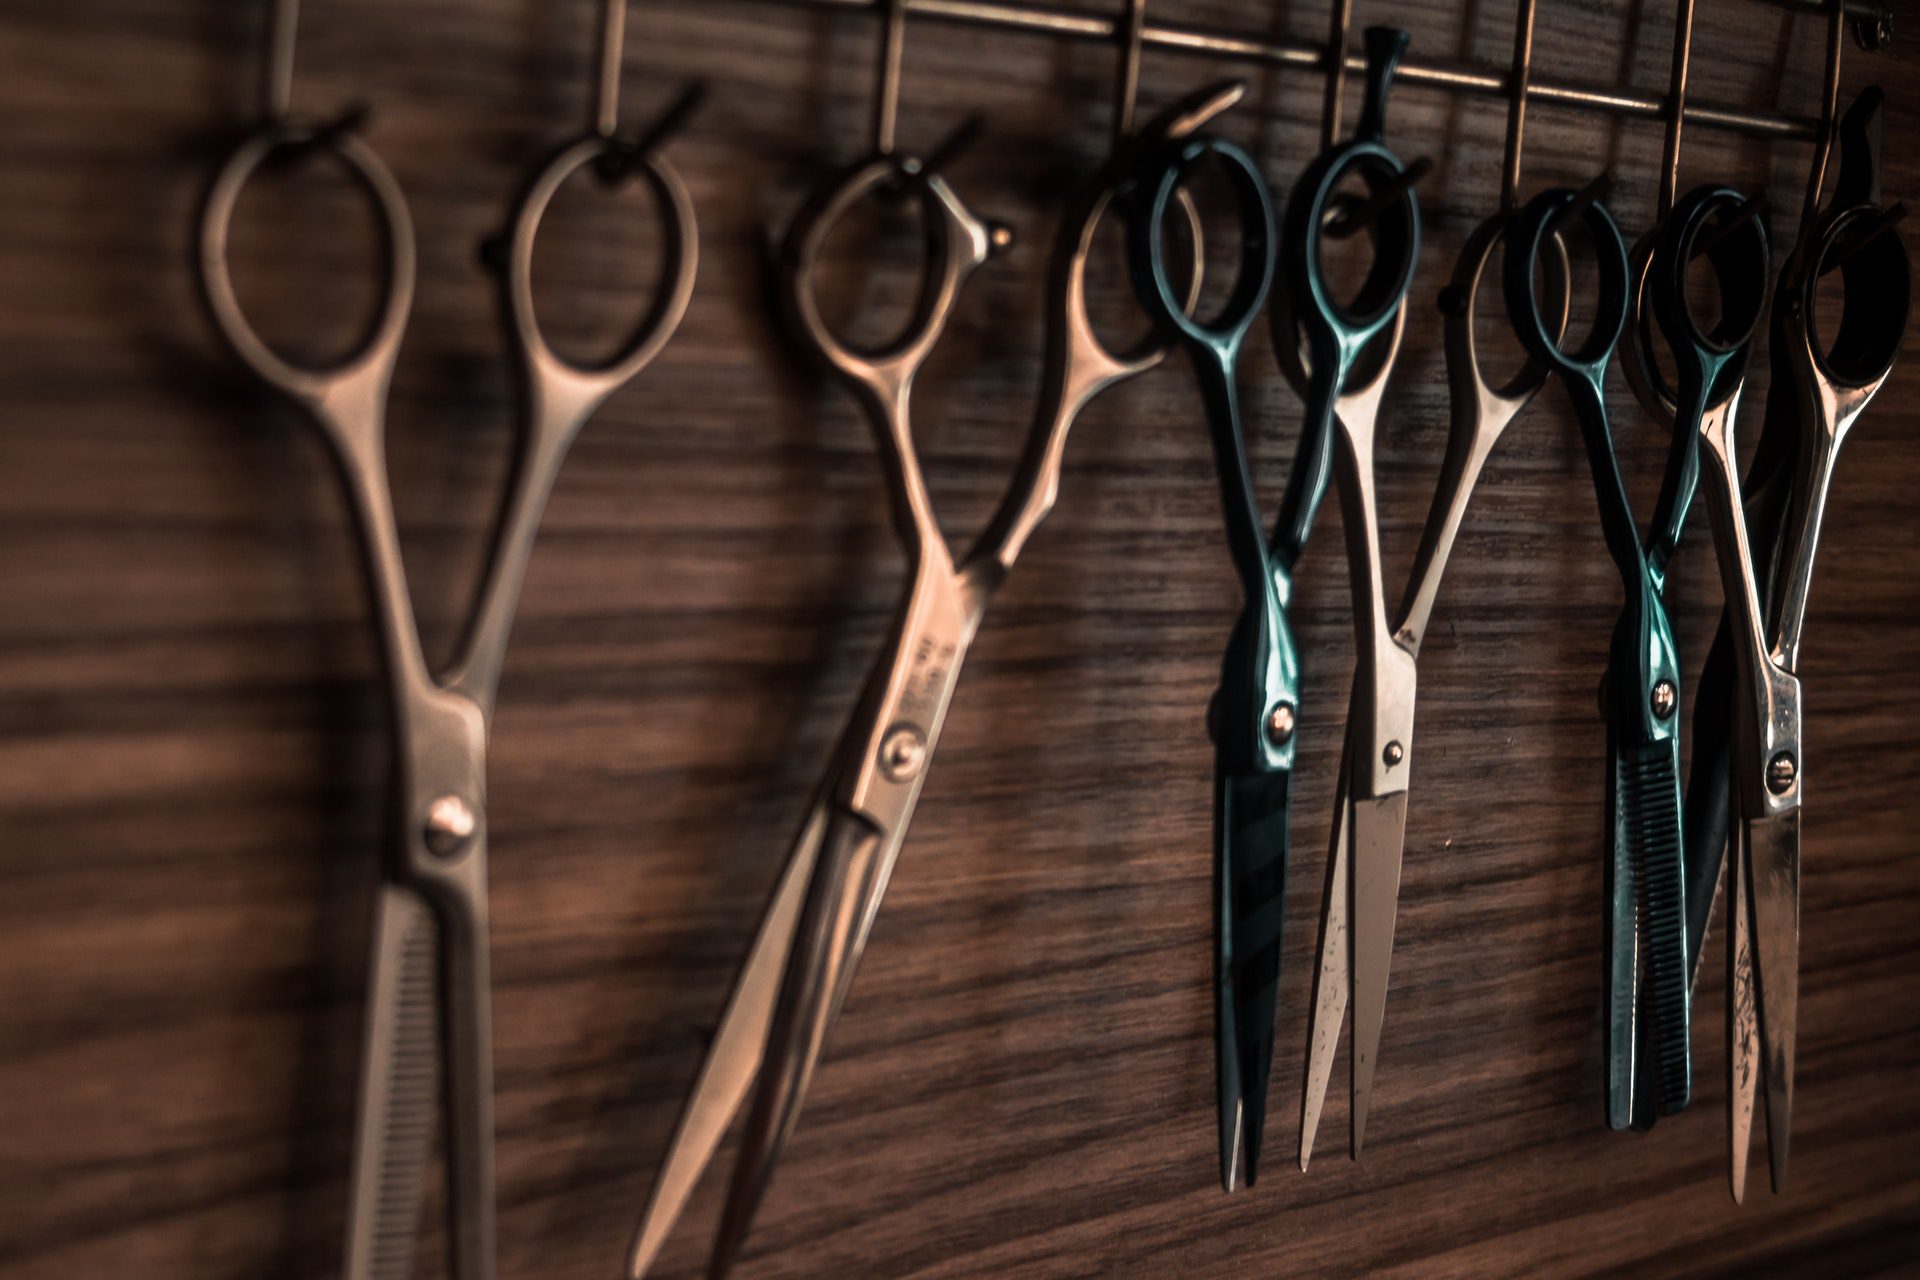 Who makes the best hair scissors in the world - Scissor Tech USA